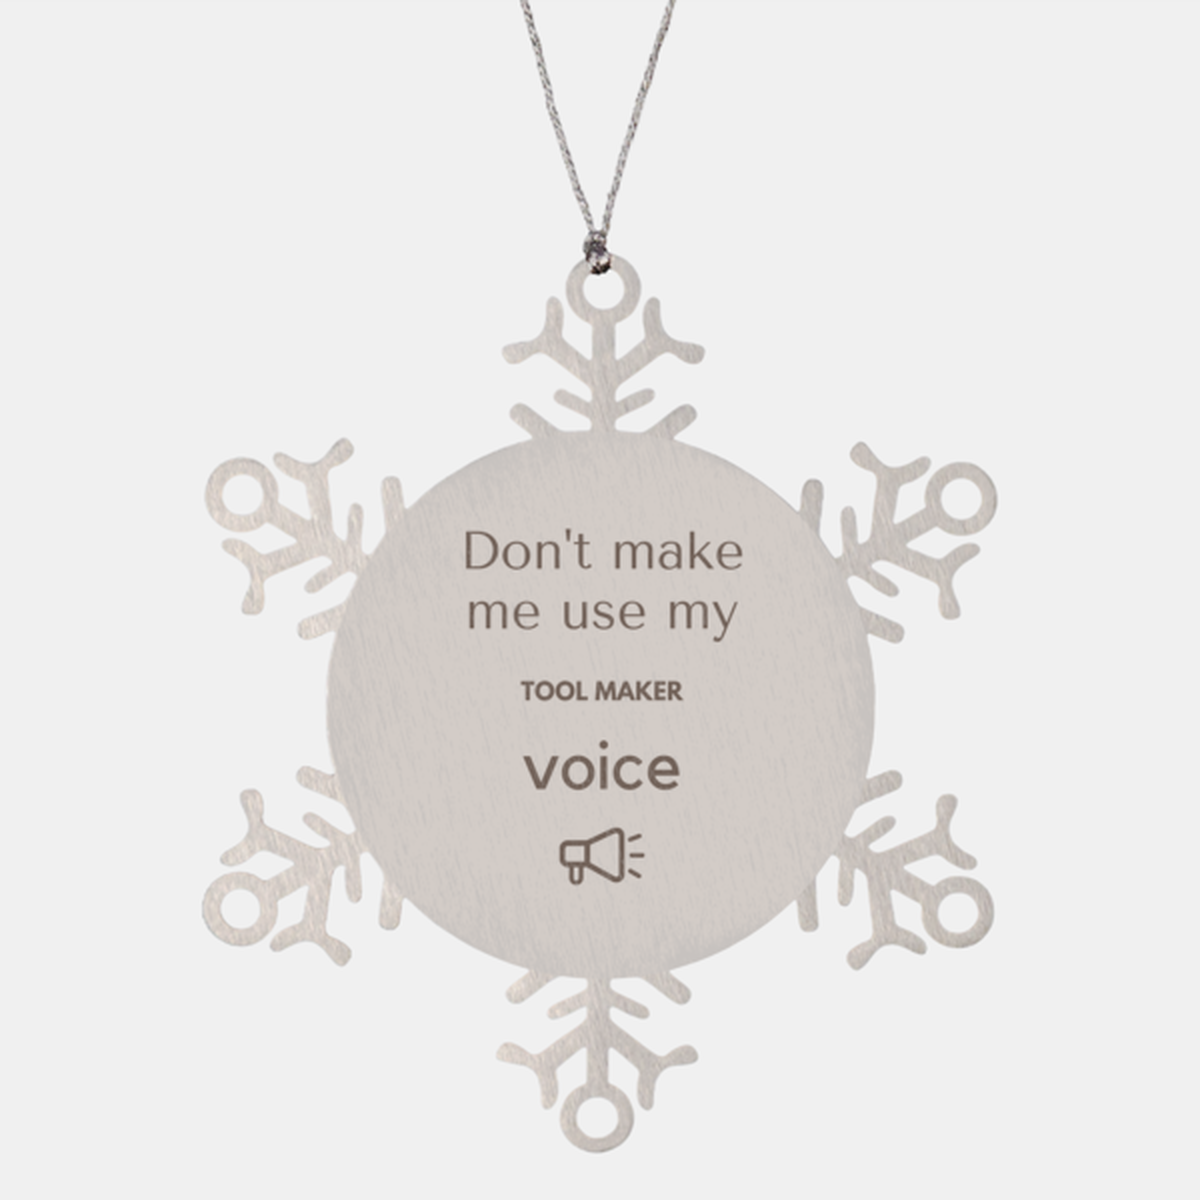 Don't make me use my Tool Maker voice, Sarcasm Tool Maker Ornament Gifts, Christmas Tool Maker Snowflake Ornament Unique Gifts For Tool Maker Coworkers, Men, Women, Colleague, Friends